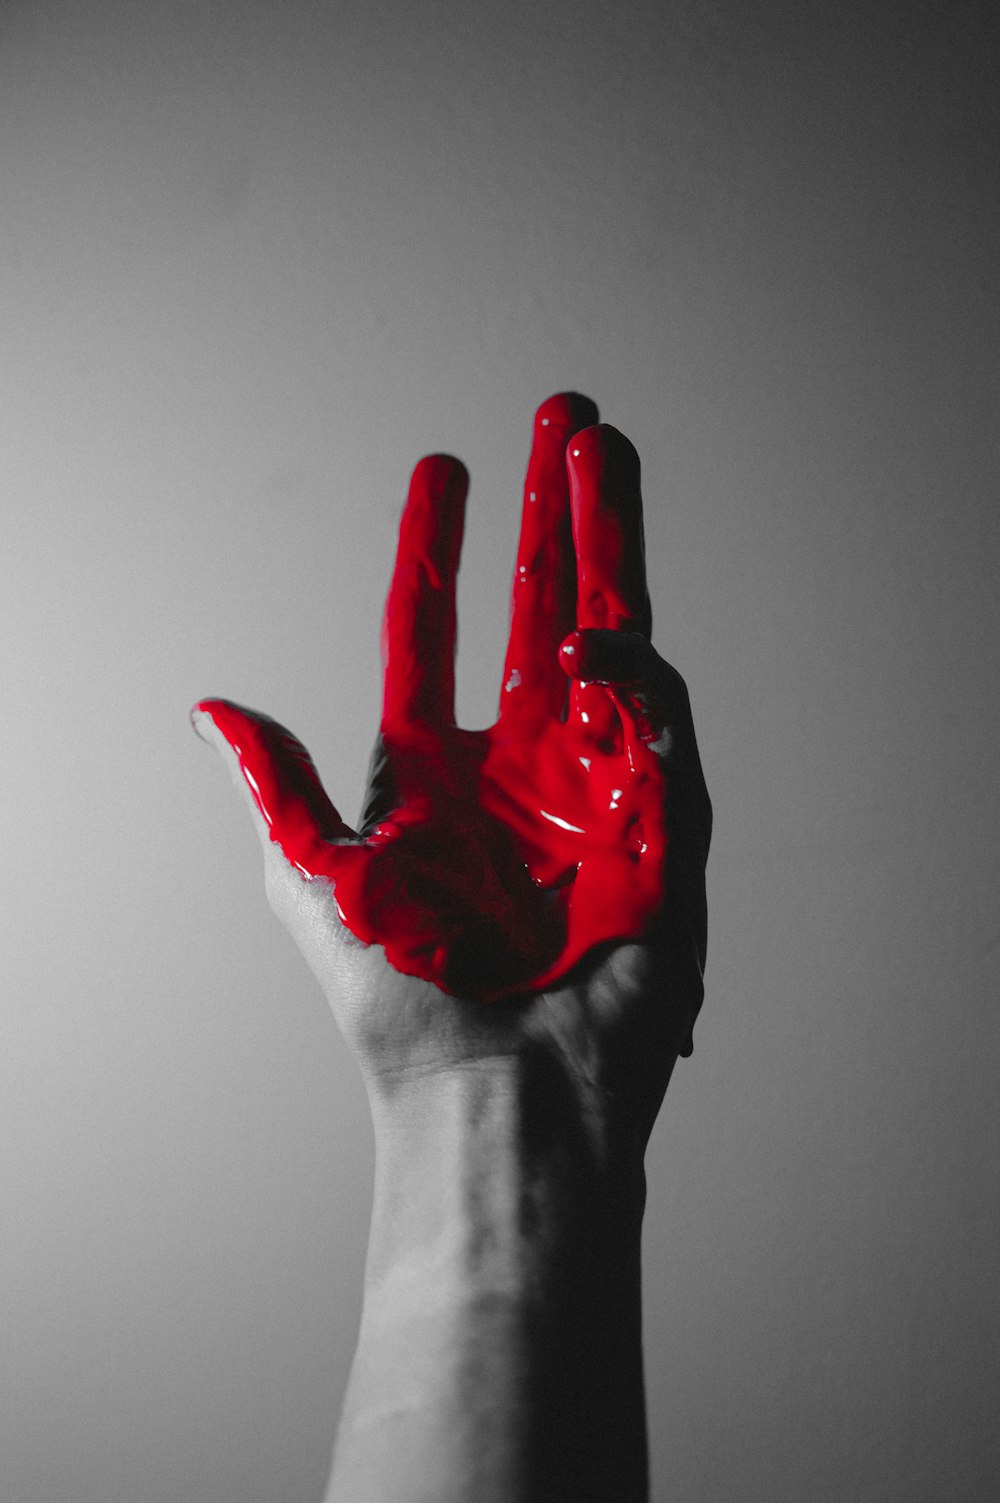 red hand paint on hand